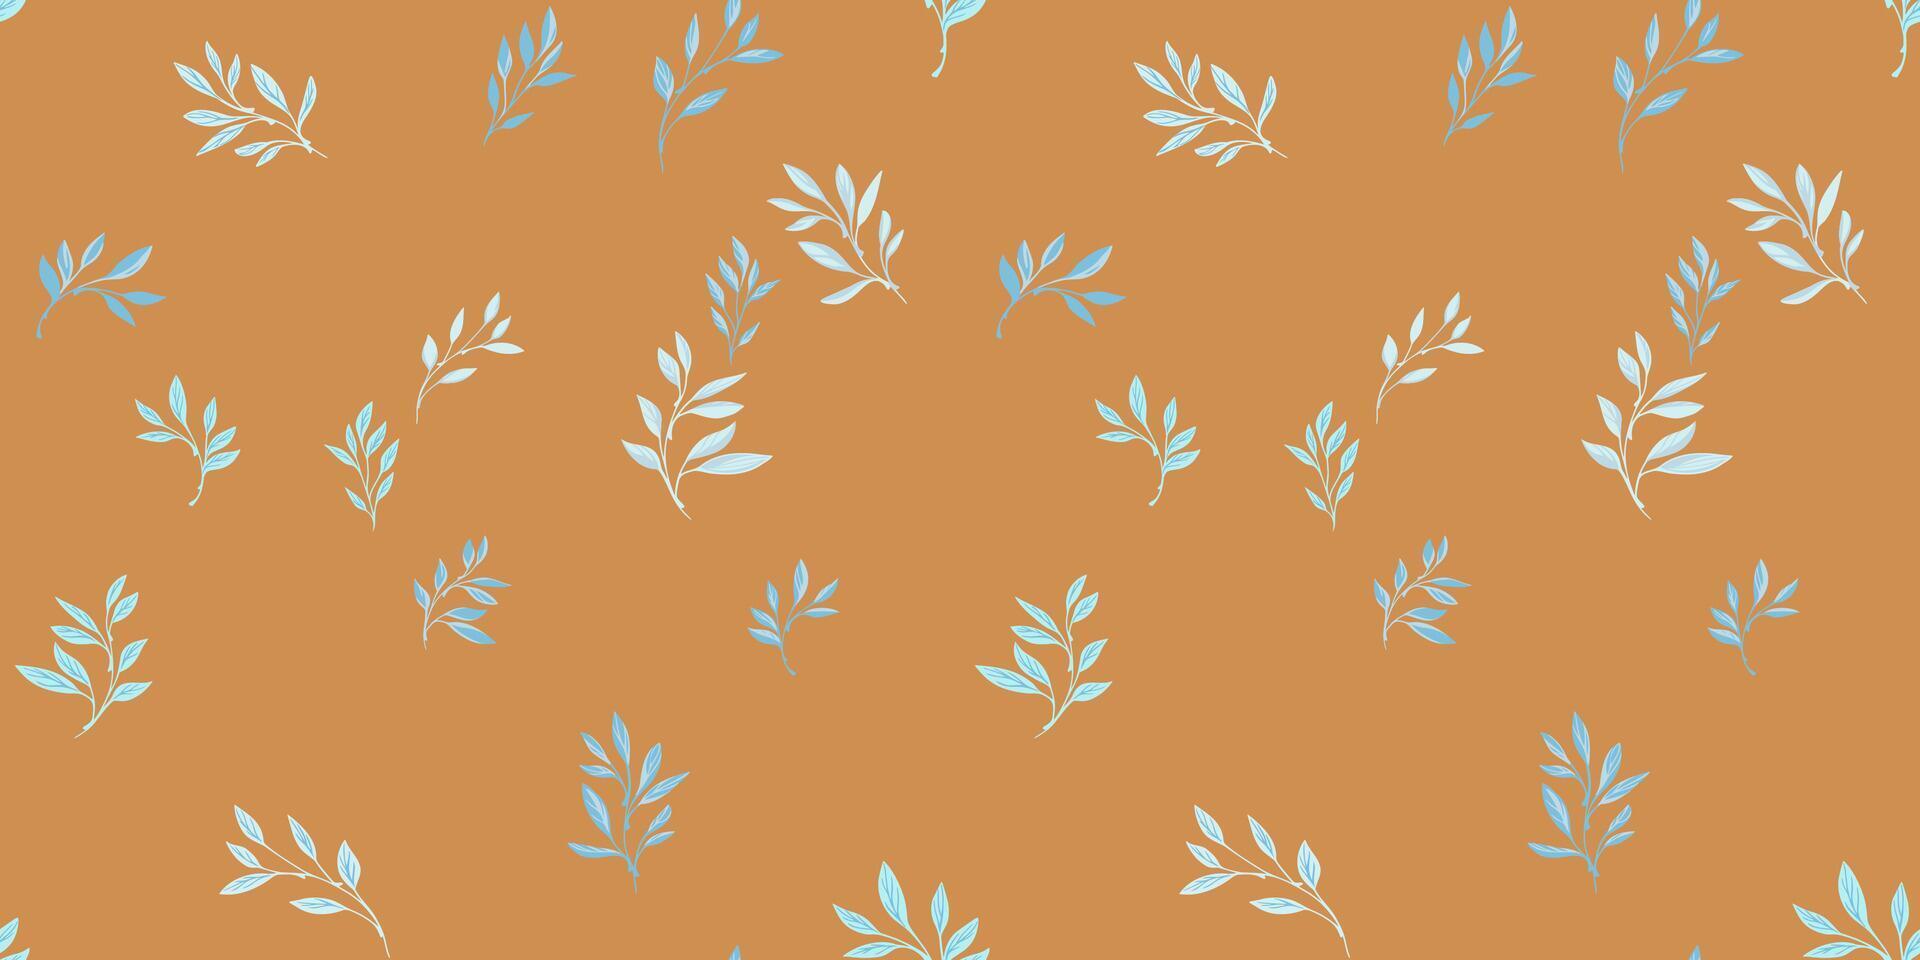 Abstract simple tiny leaves seamless pattern is randomly scattered. Vector hand drawn. Minimalist isolate blue leaf stems background. Template for designs, textile, printing